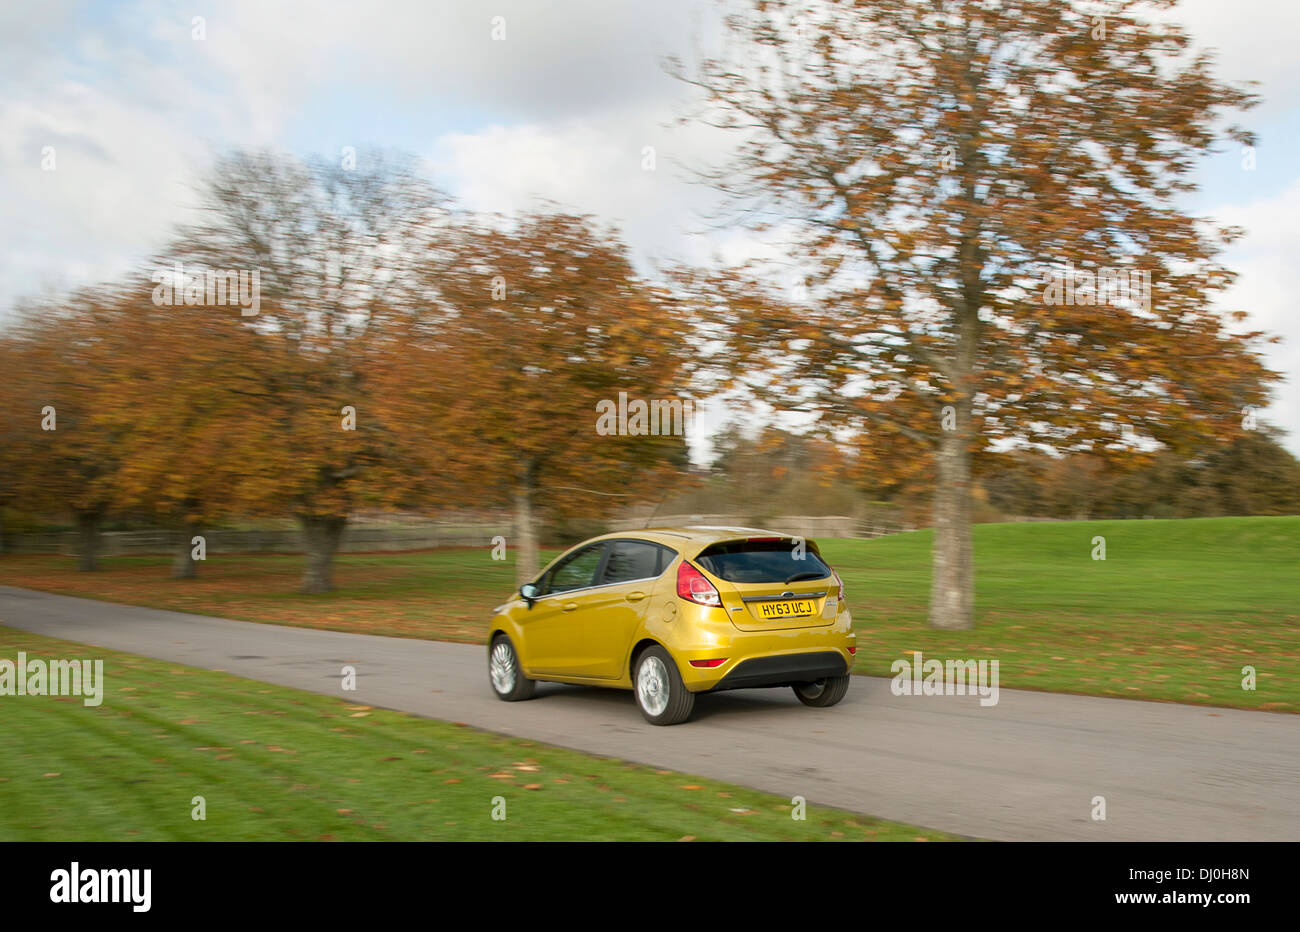 2013 Ford Fiesta 1.0 litre Econetic Stock Photo